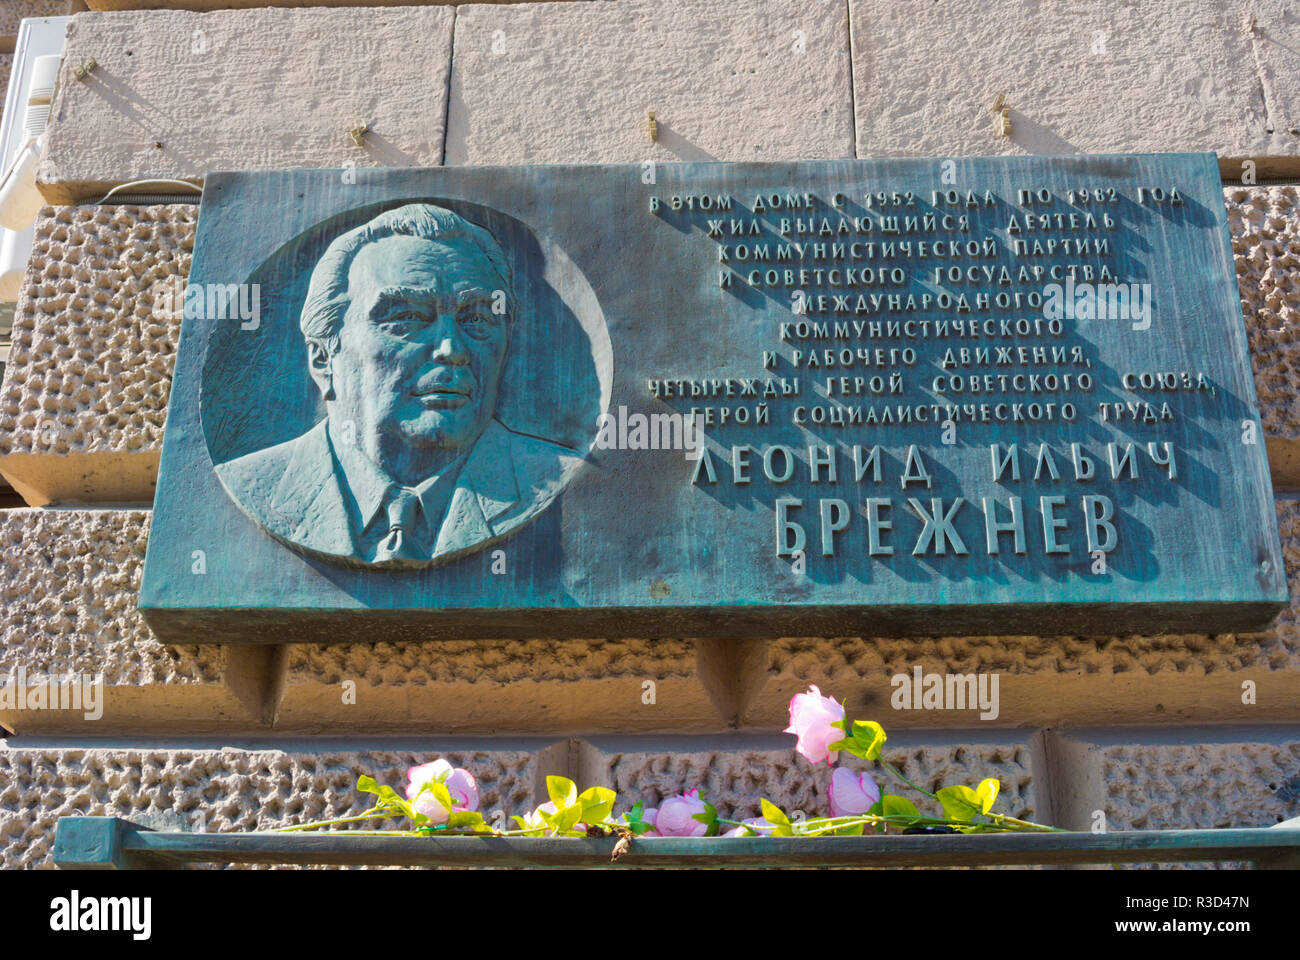 Memorial plaque to Leonid Brezhnev, the leader of Soviet Union, outside his former residence, Kutuzovsky Prospekt, Moscow, Russia Stock Photo